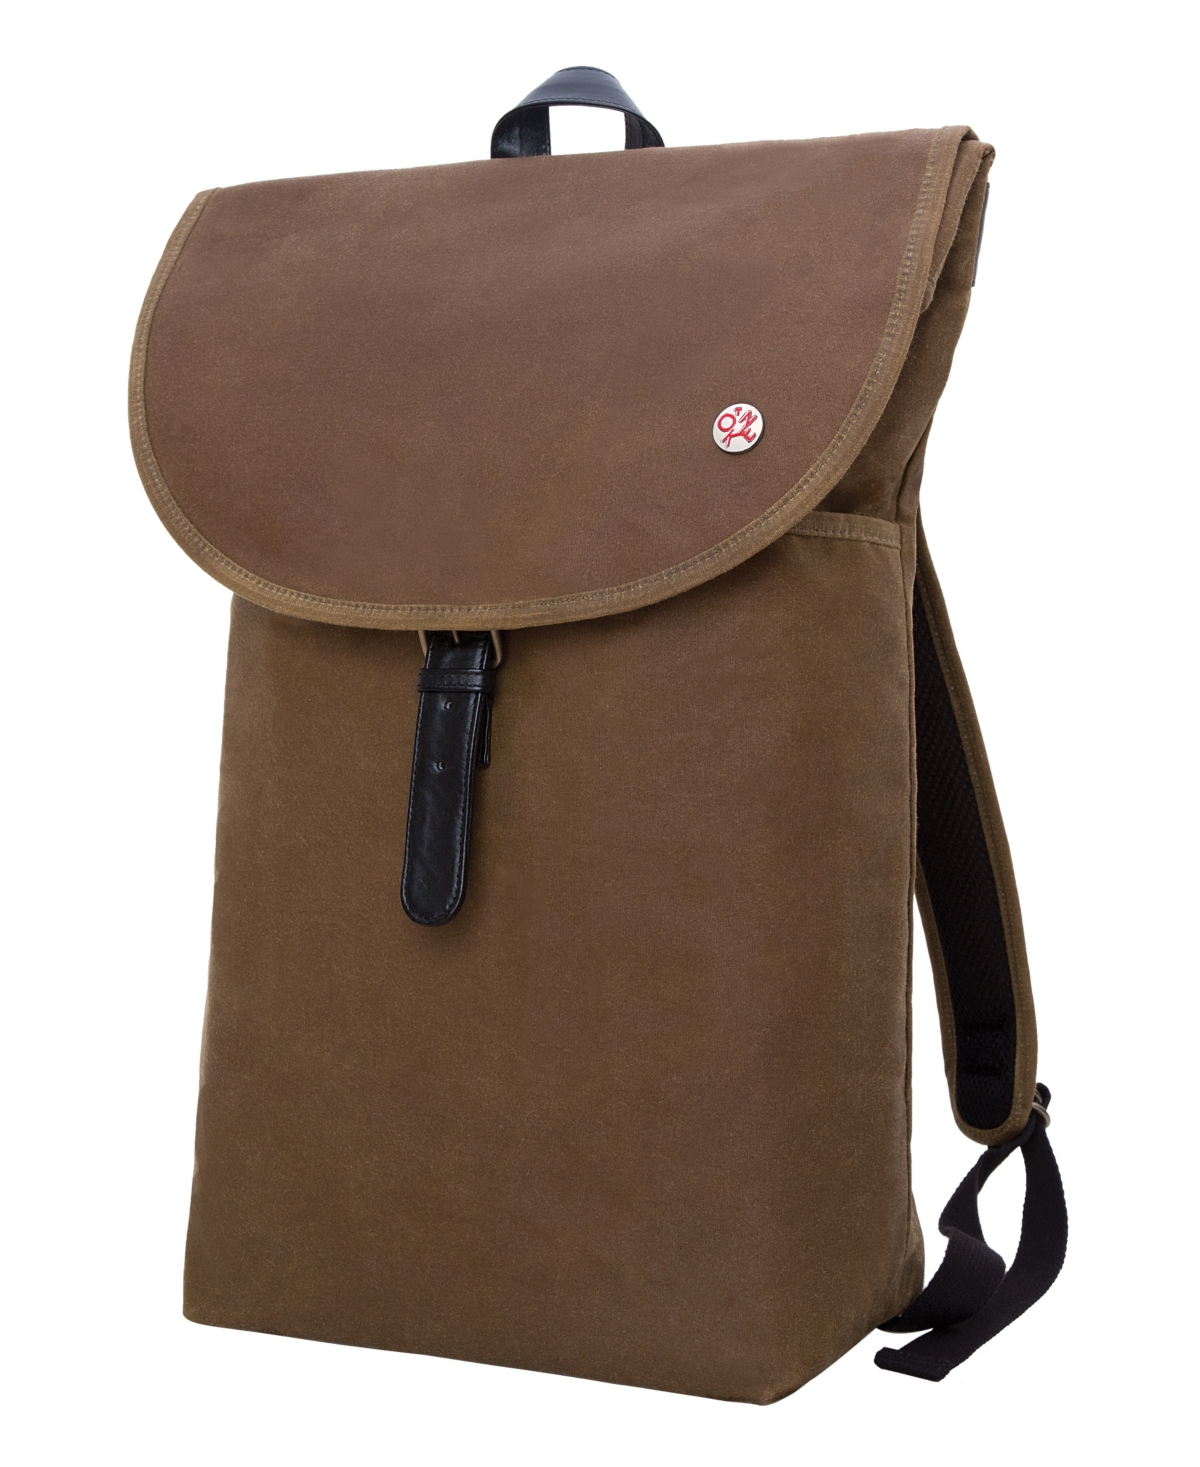 Waxed Bergen Large Backpack - Tan